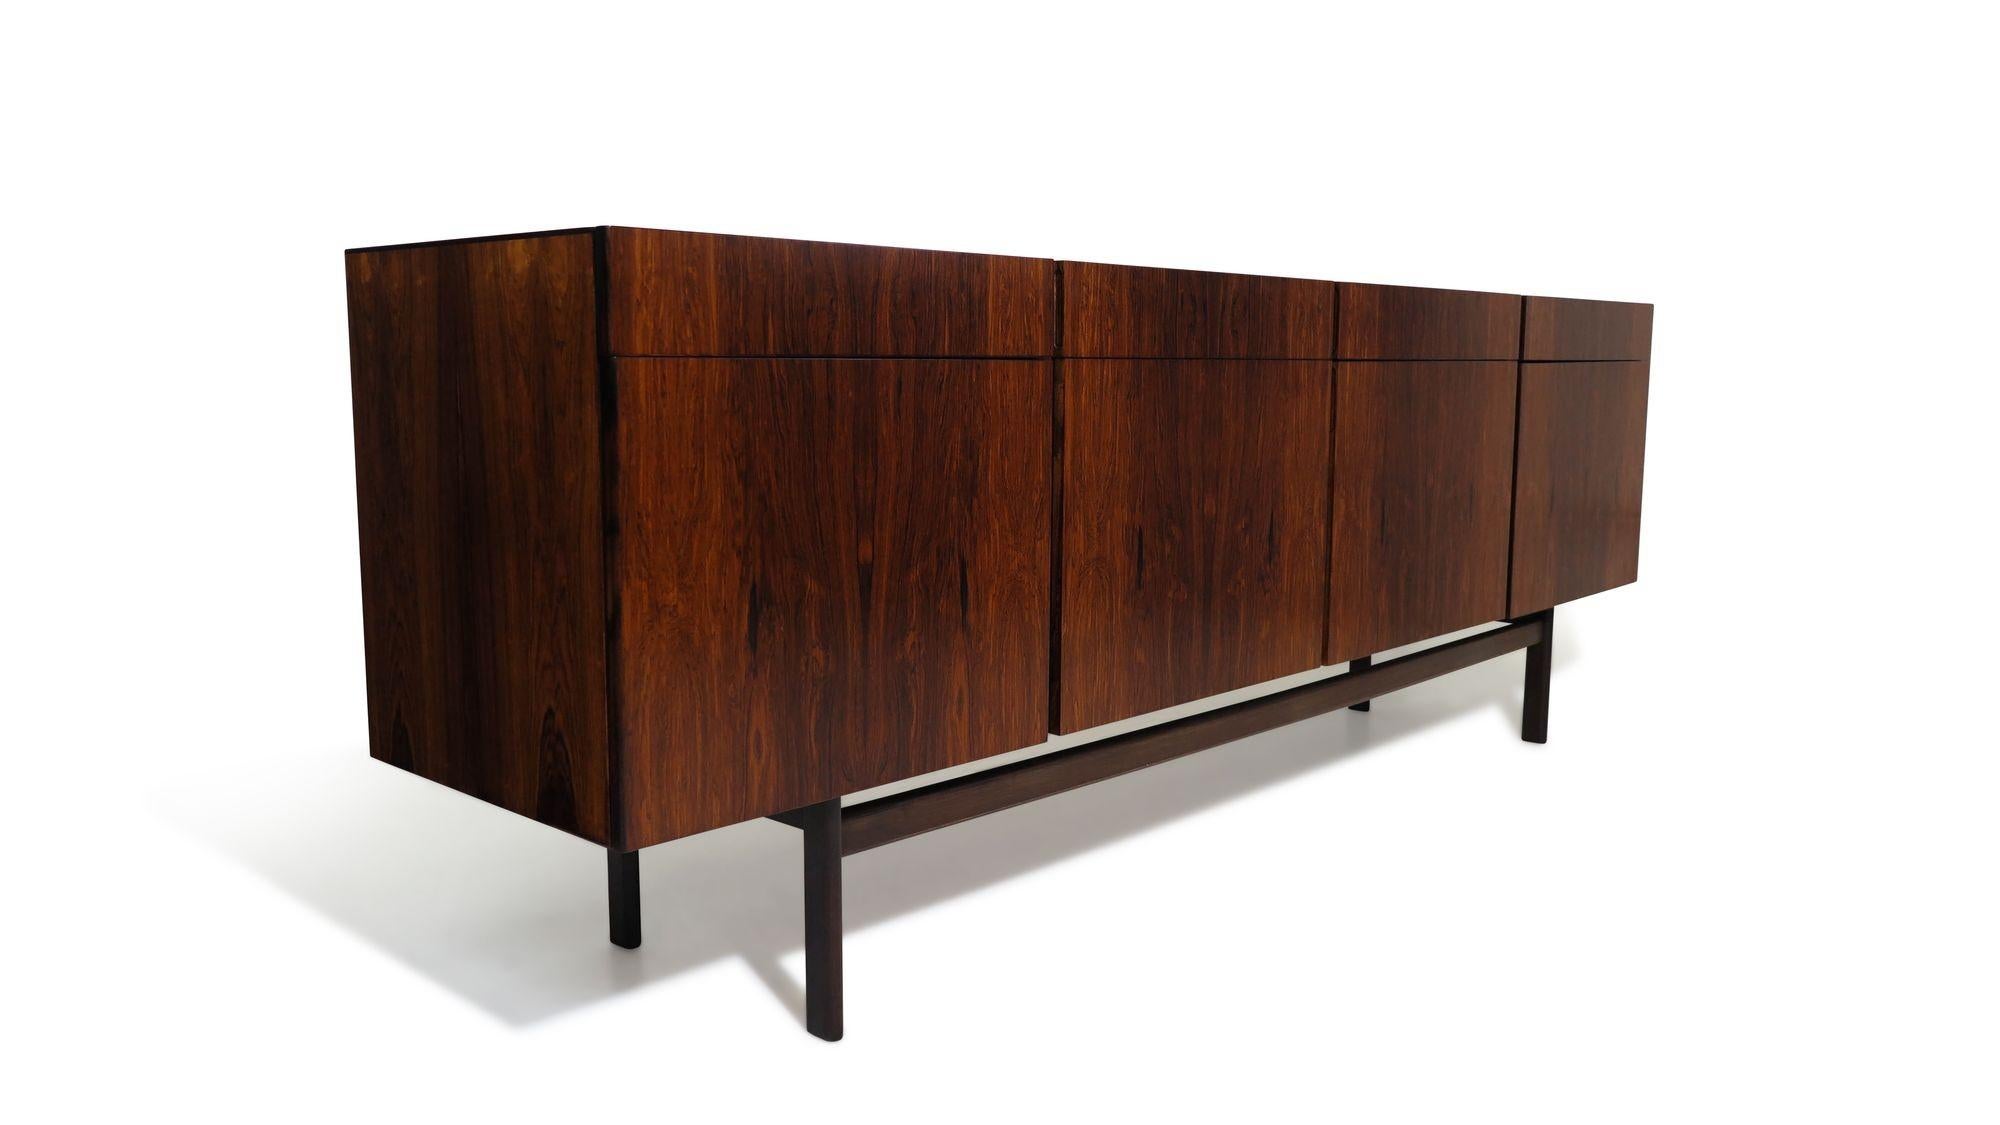 Mid-century Rosewood credenza designed by Ib Kofod-Larsen, Denmark, 1955. This sideboard features book-matched rosewood with four cabinet doors below four drawers. Upon opening, the doors reveal an oak interior with adjustable shelves and a series